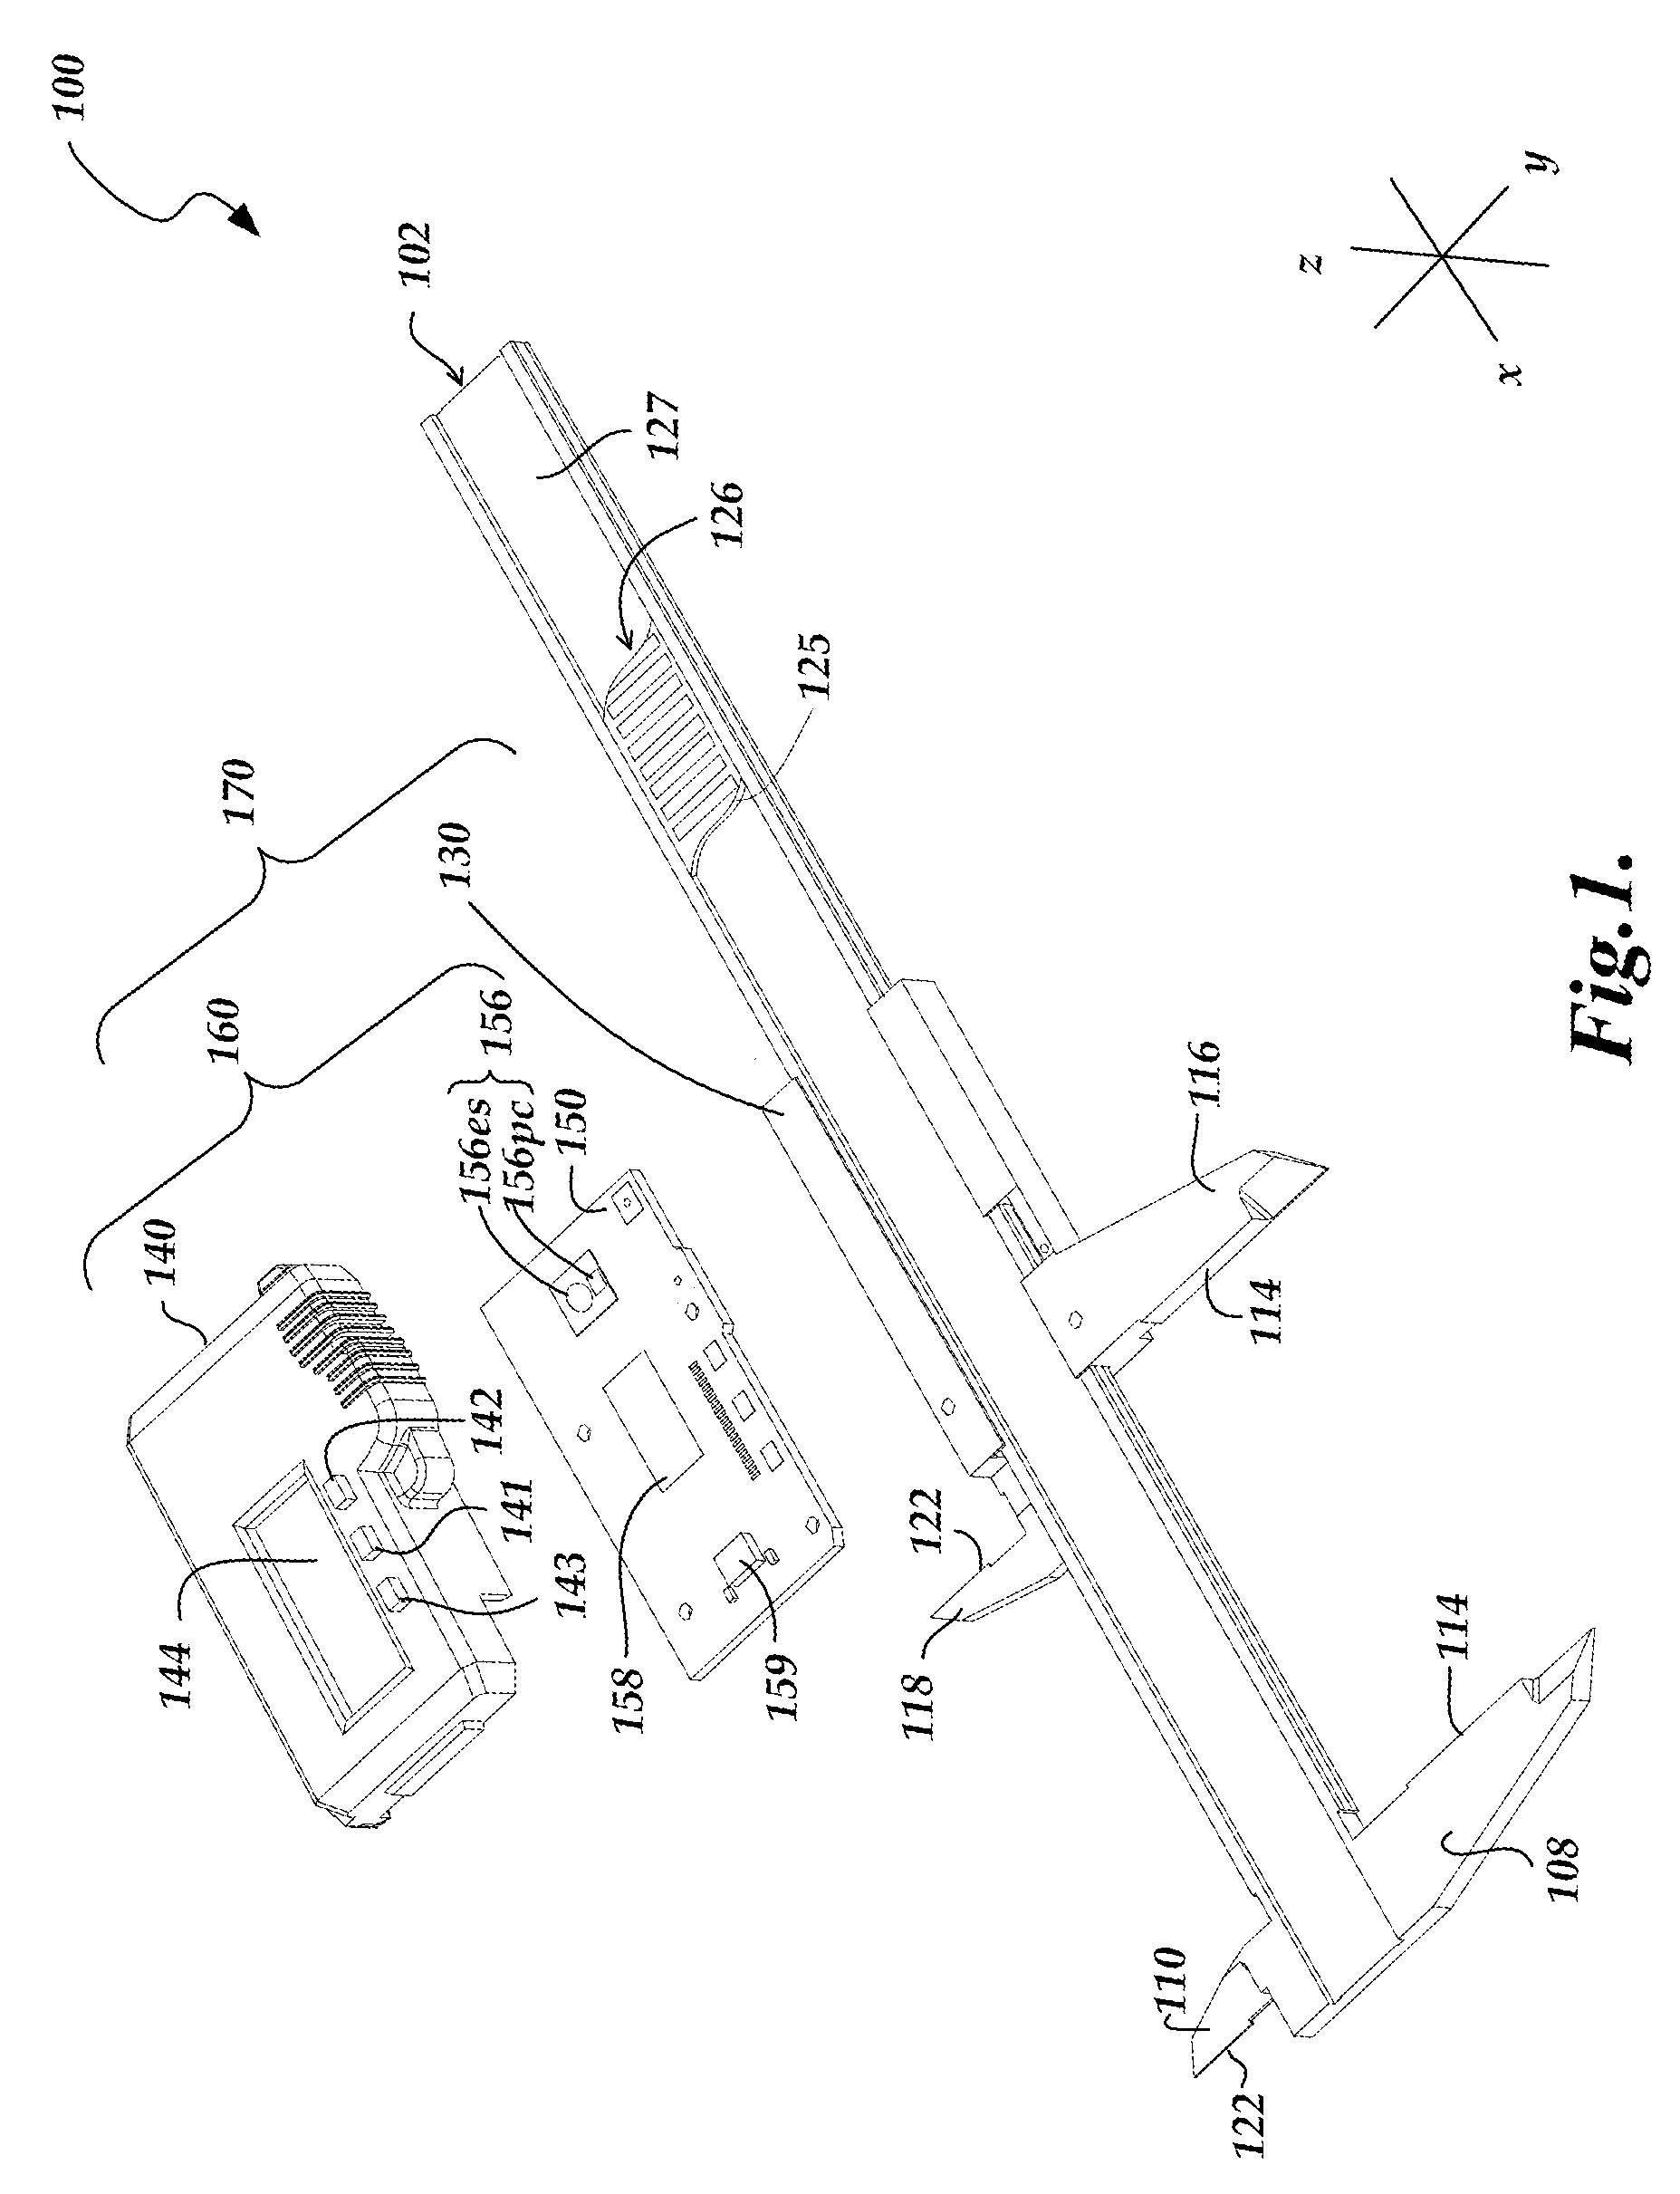 Electronic caliper configured to generate power for measurement operations